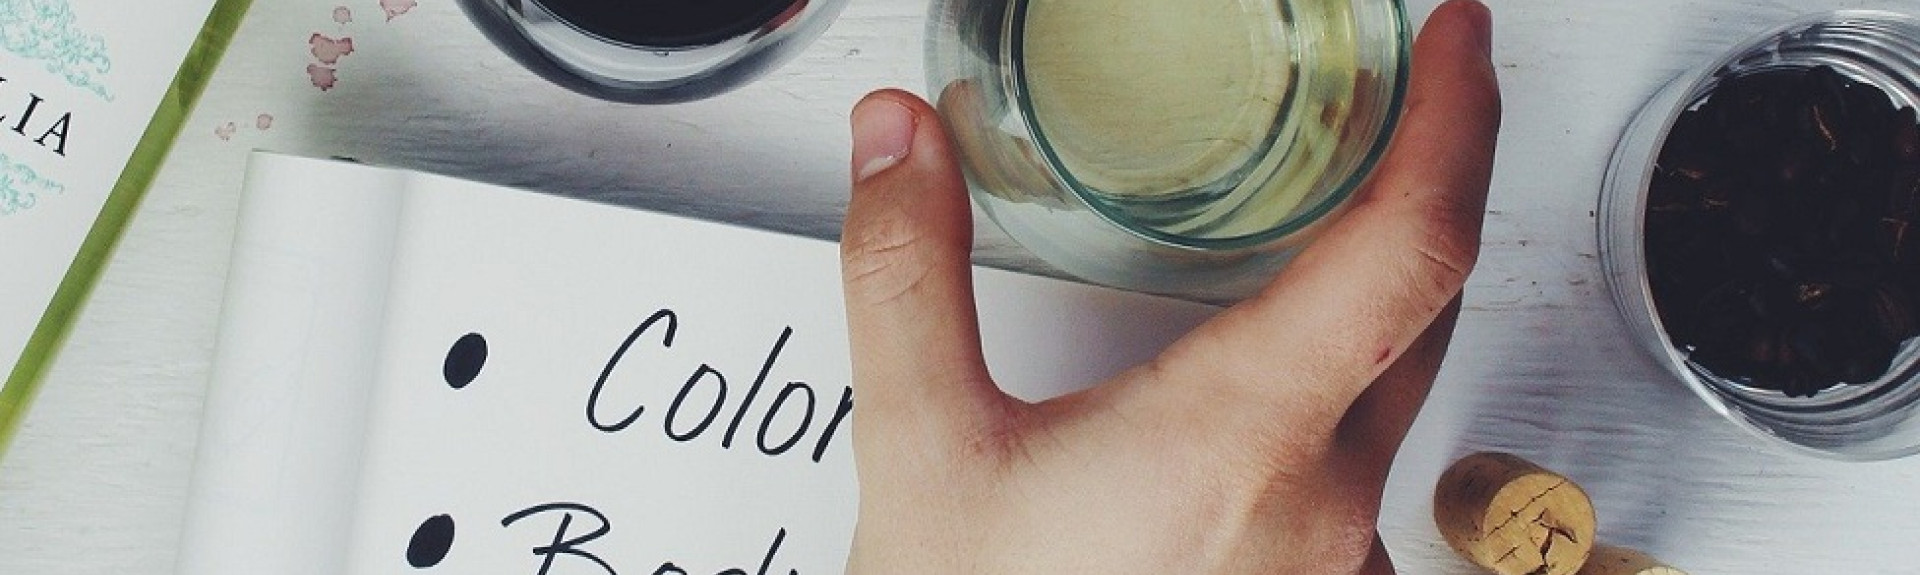 How to Write Wine Tasting Notes Like a Pro